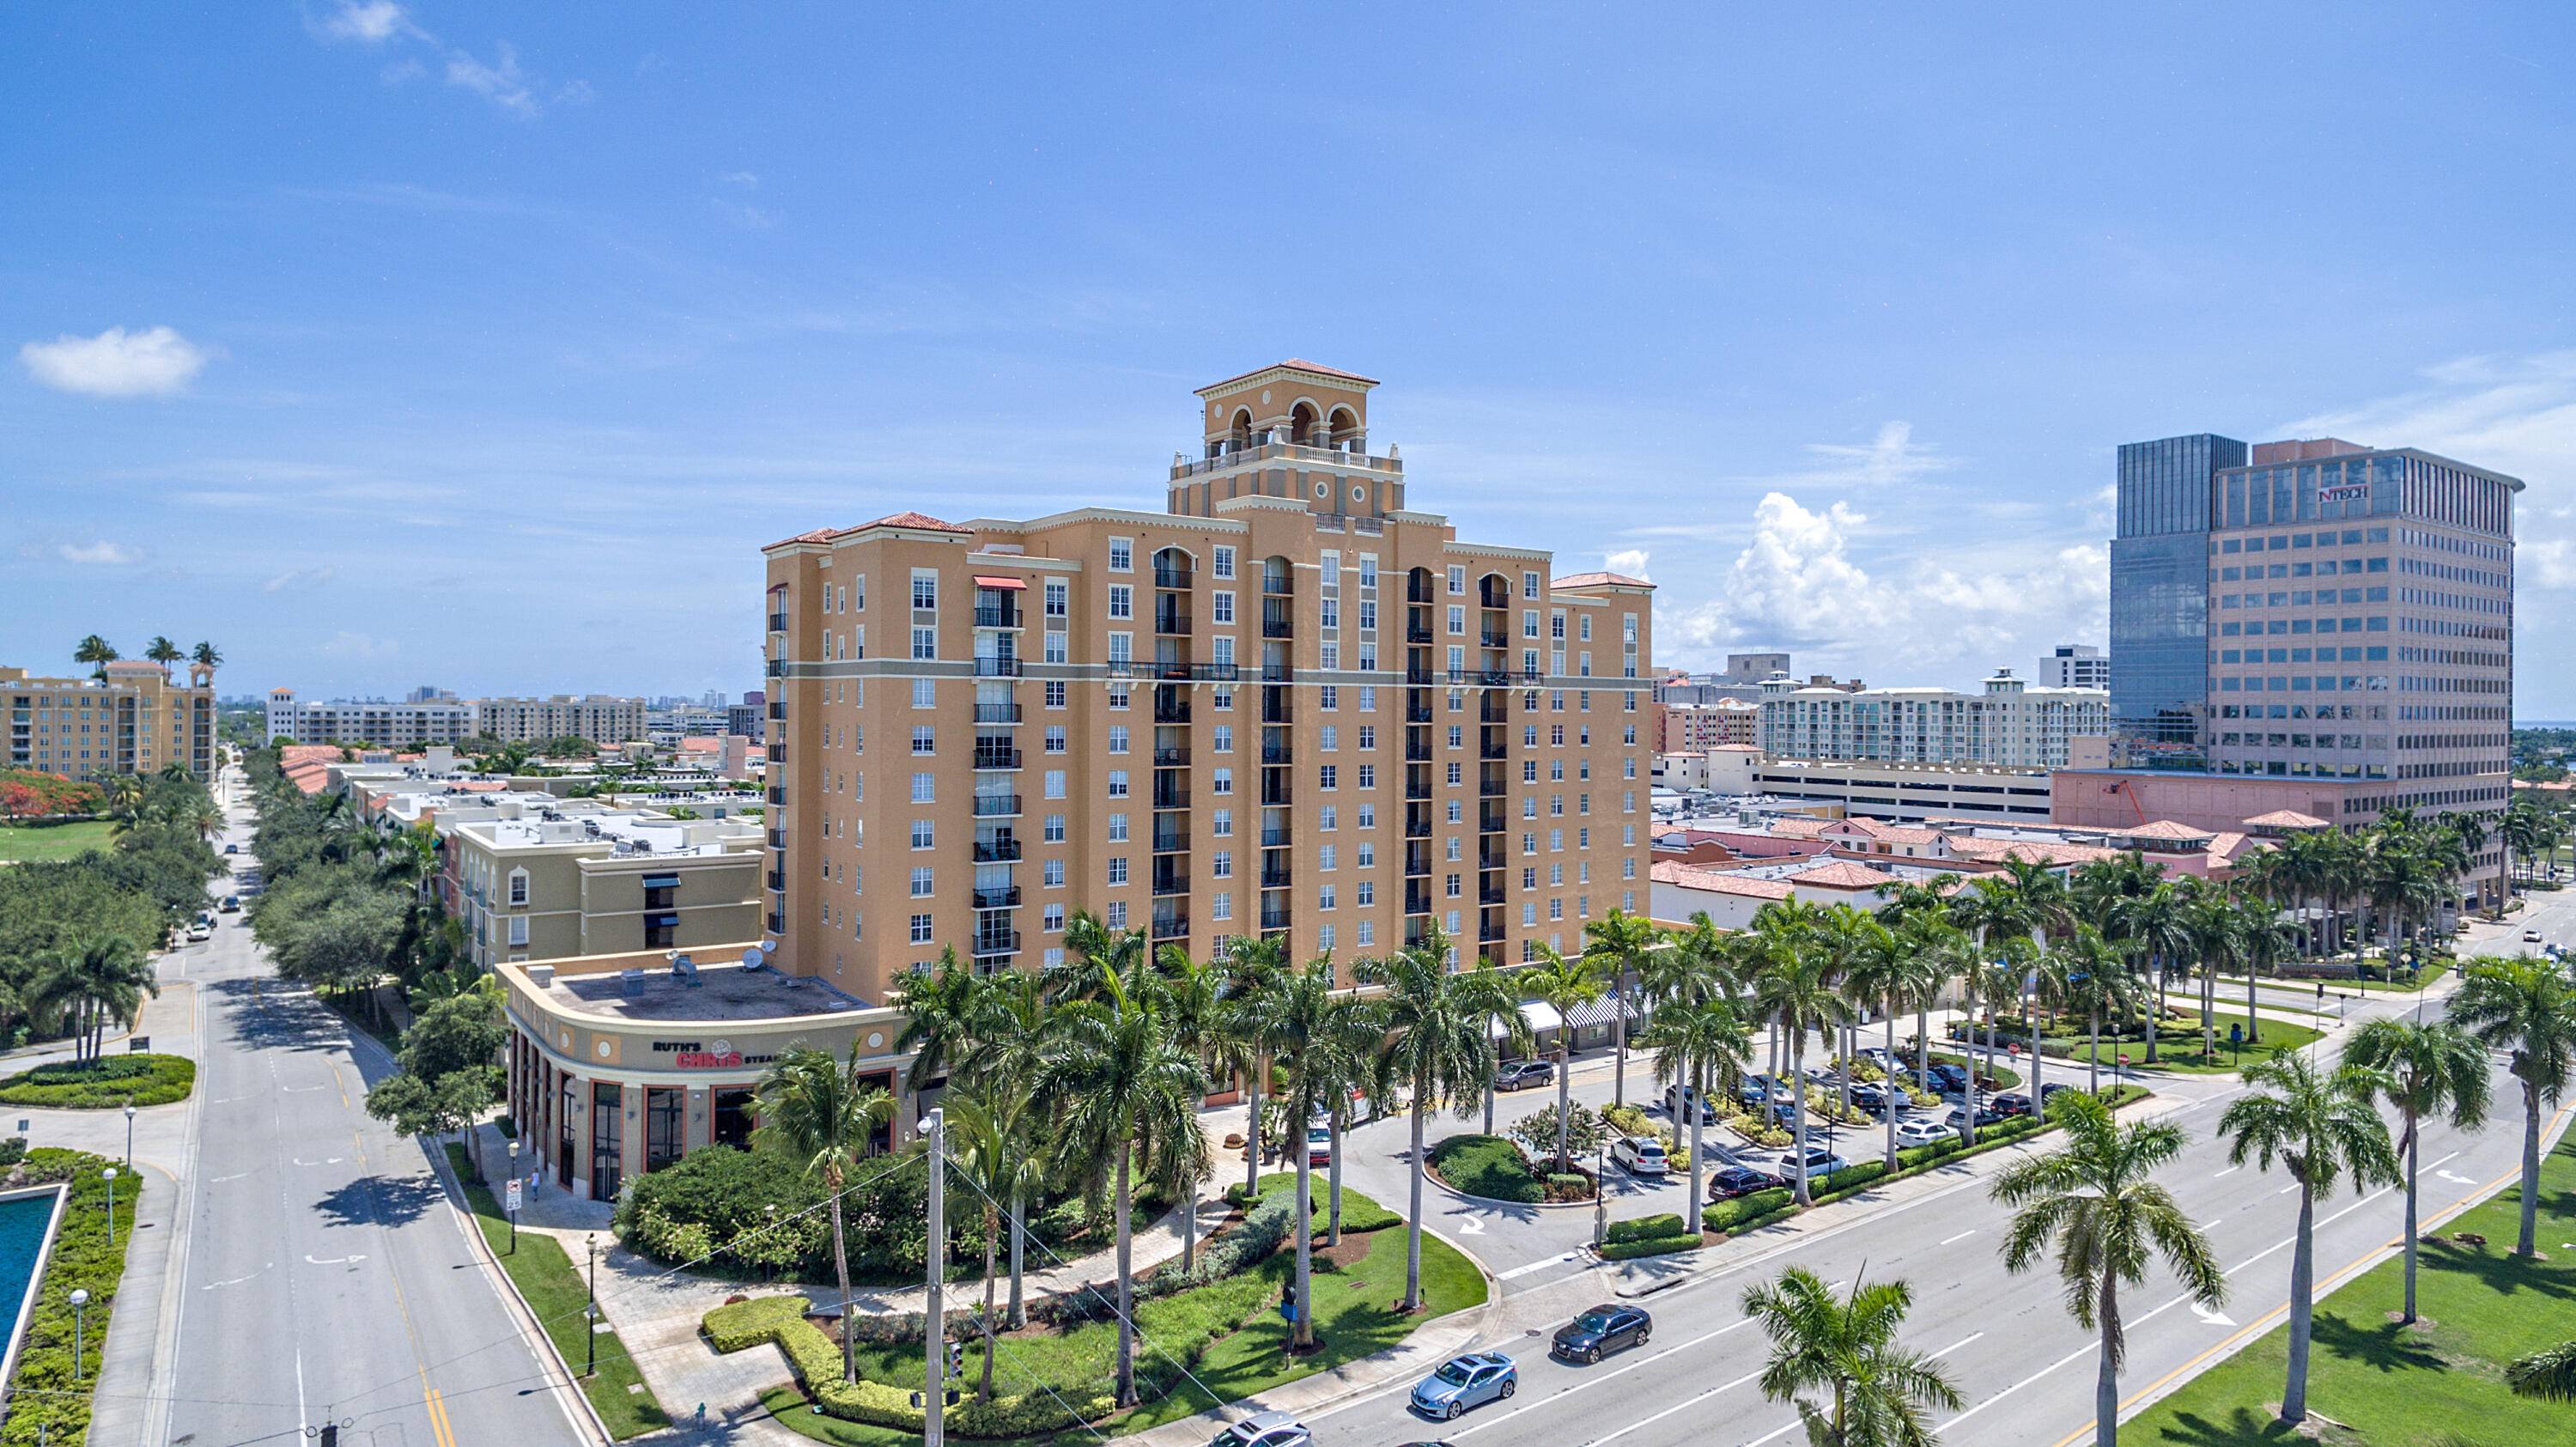 2 2, South Facing Apartment, 1, 132 square feet, split floor plan, great location, proximity to The Square, West Palm and all the City has to offer.